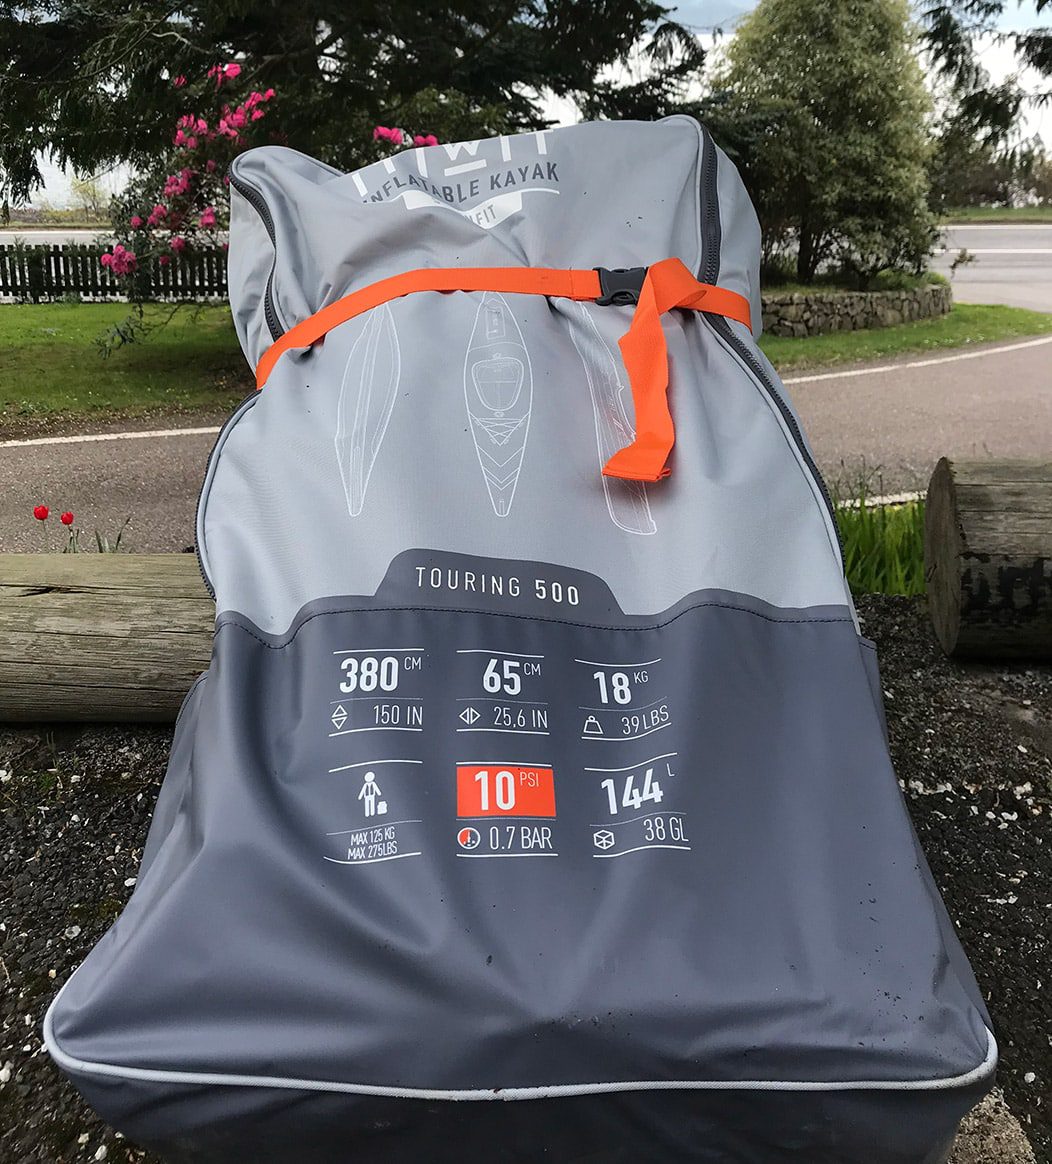 ITIWIT Strenfit X500 inflatable 1person kayak carry bag